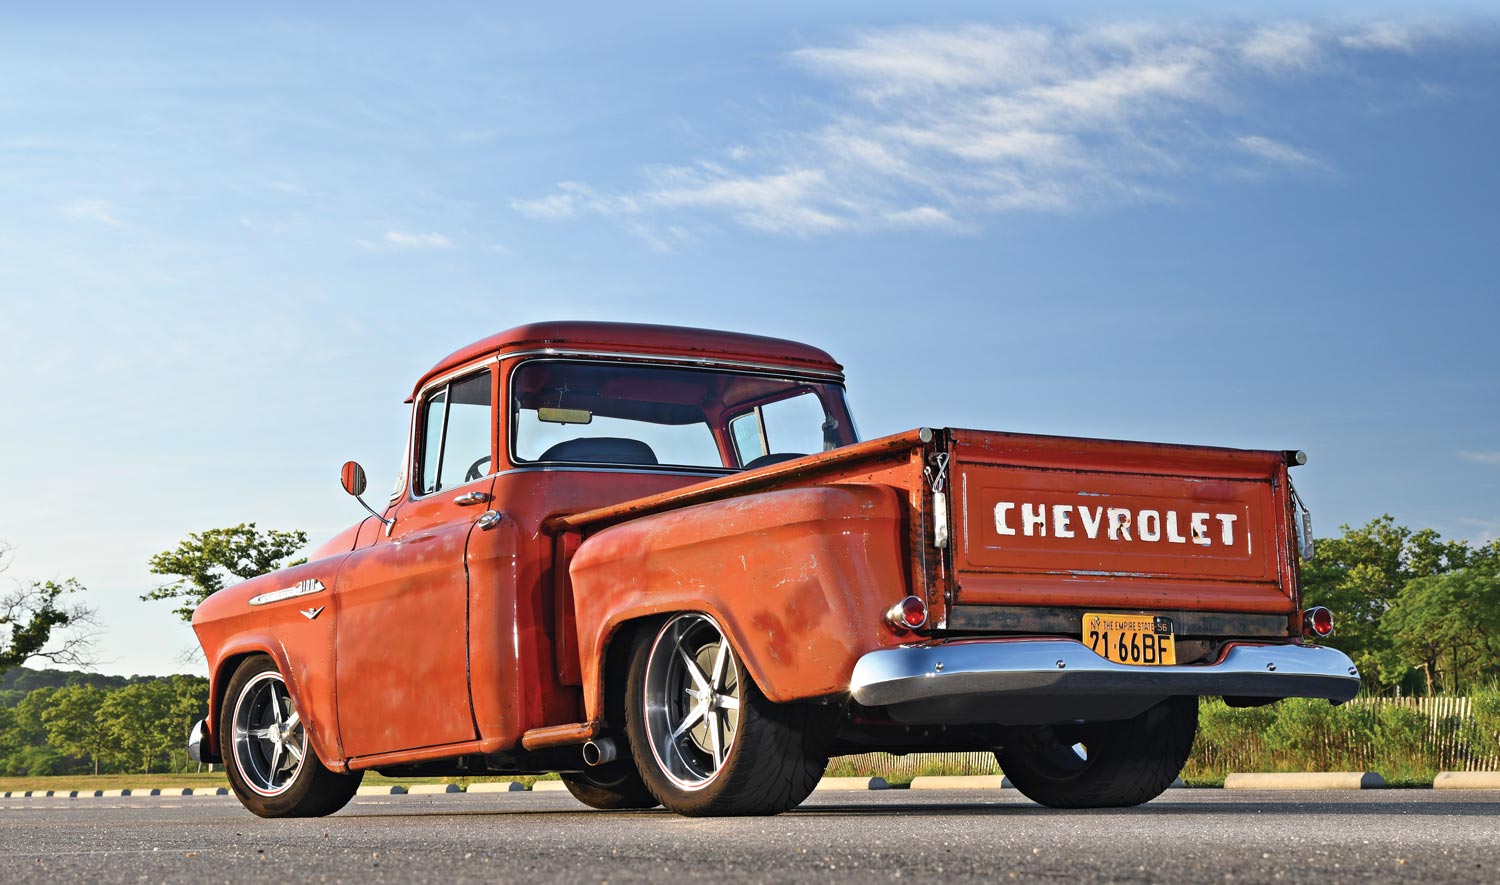 Rear side view of the 1955 Chevy